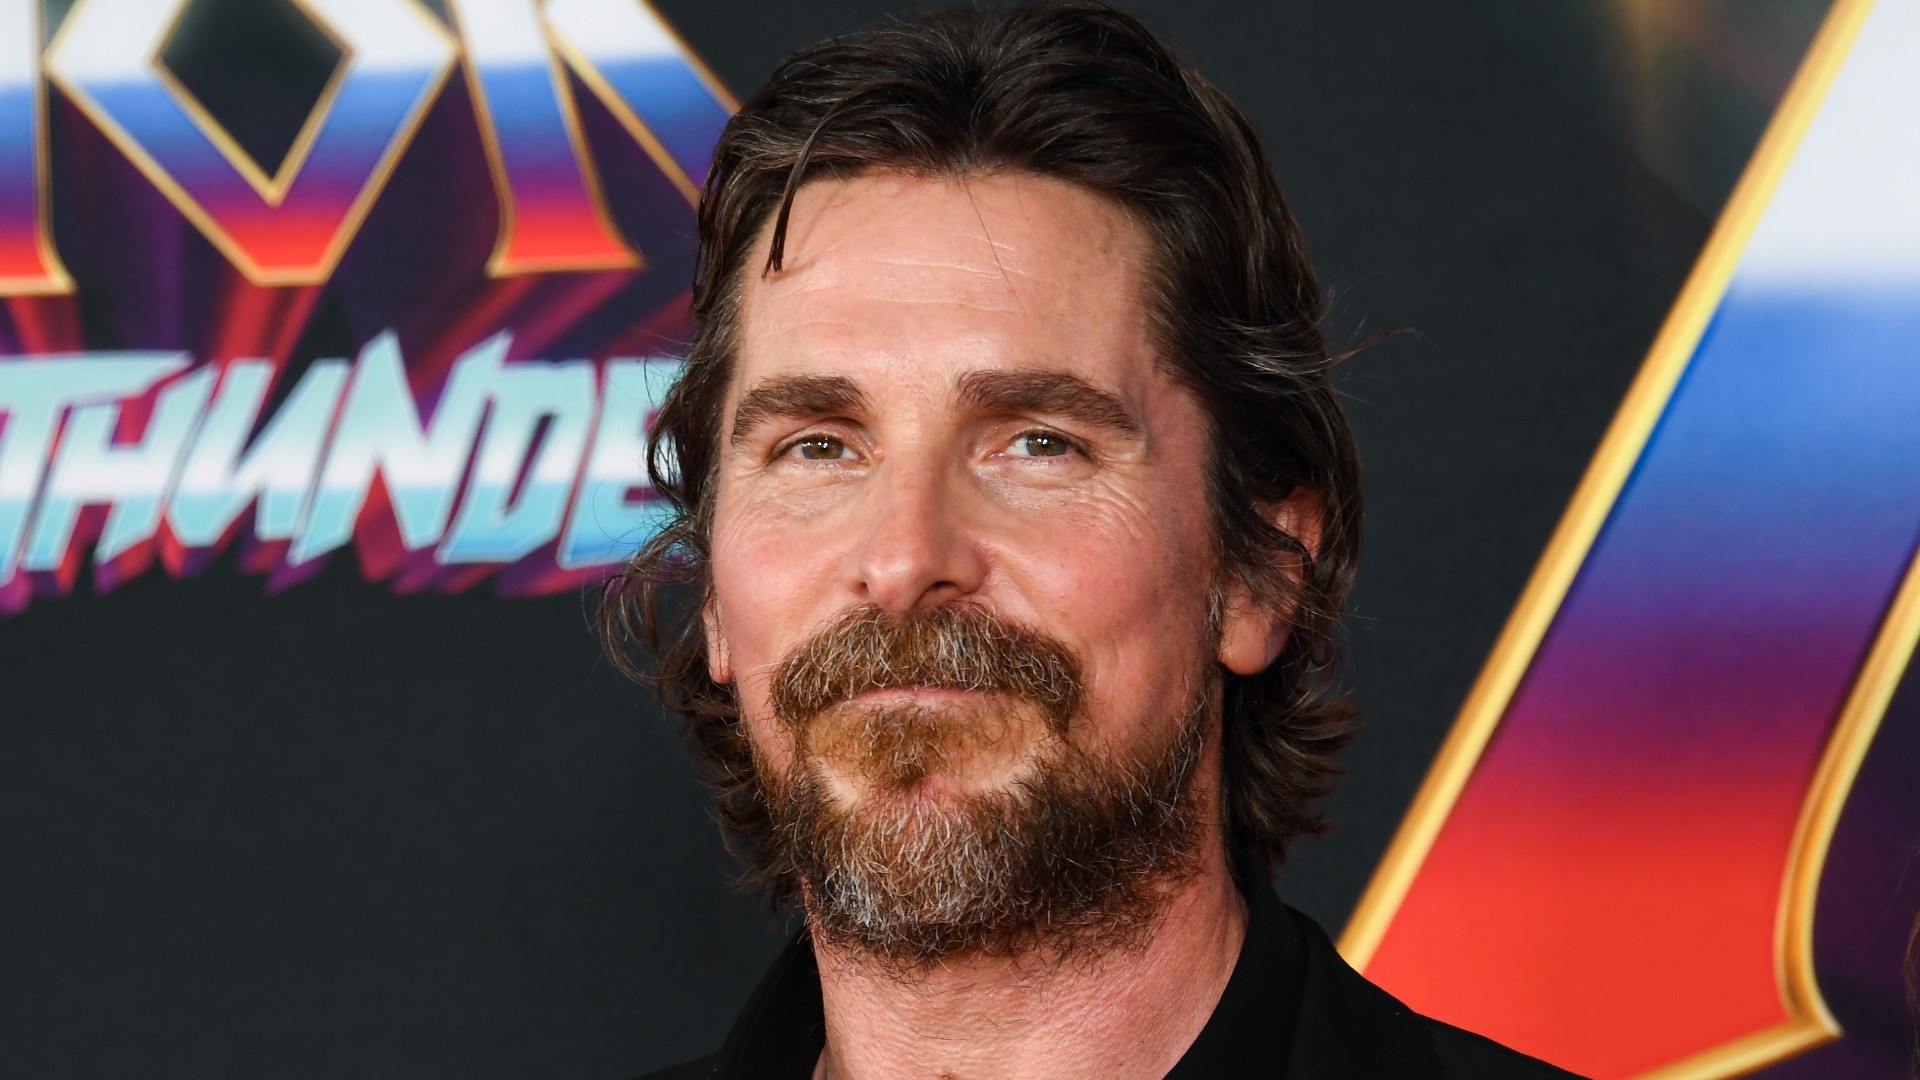 Christian Bale Explains Why He Doesn't Consider Himself a 'Leading Man'